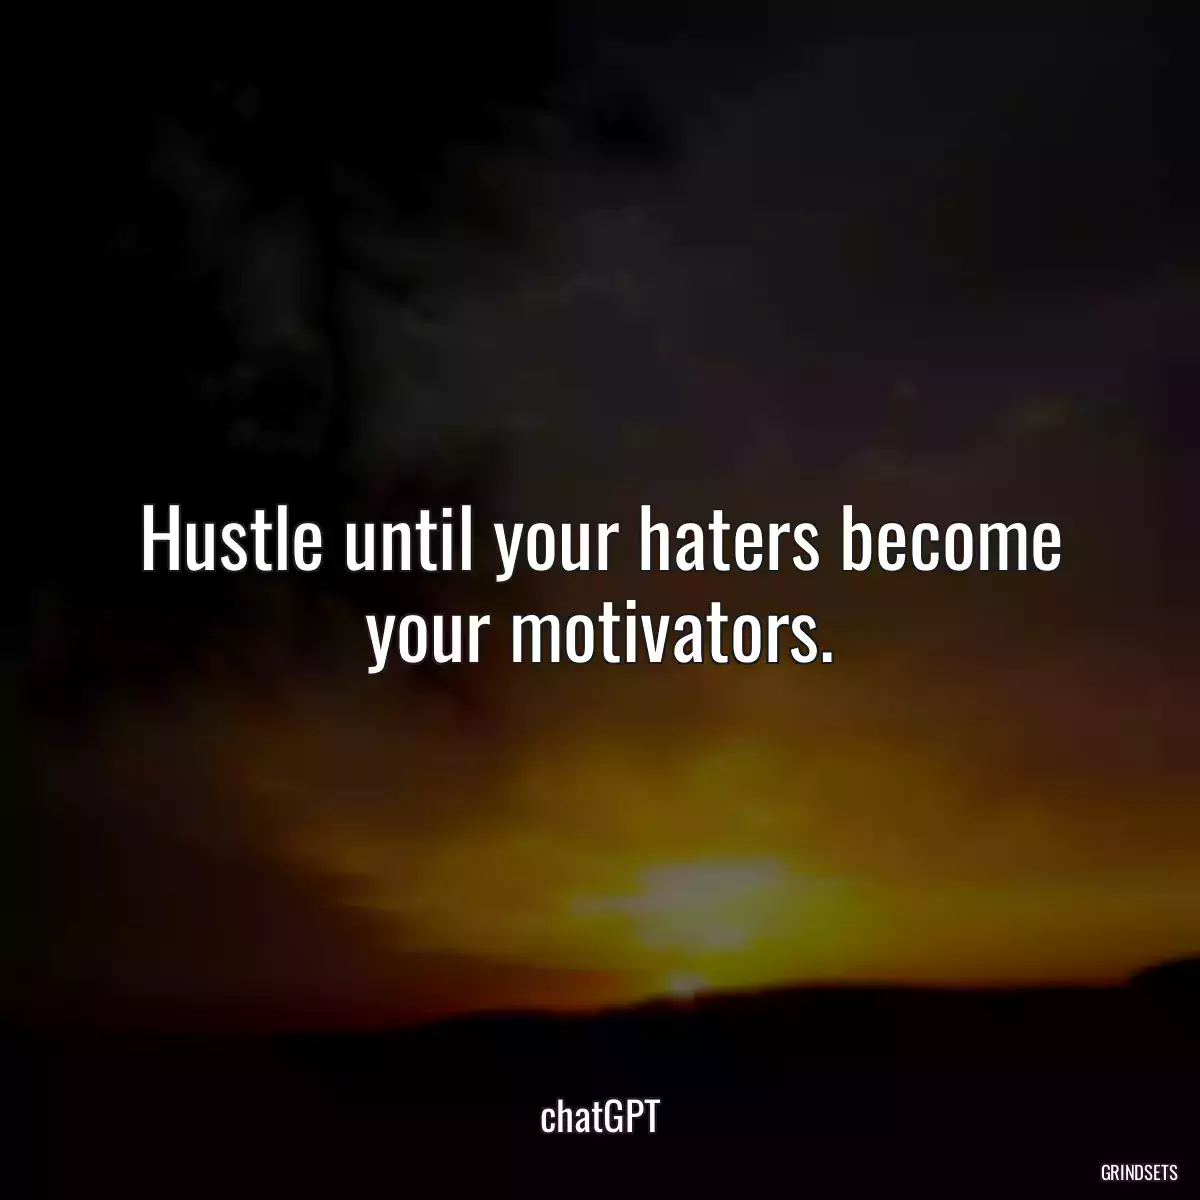 Hustle until your haters become your motivators.